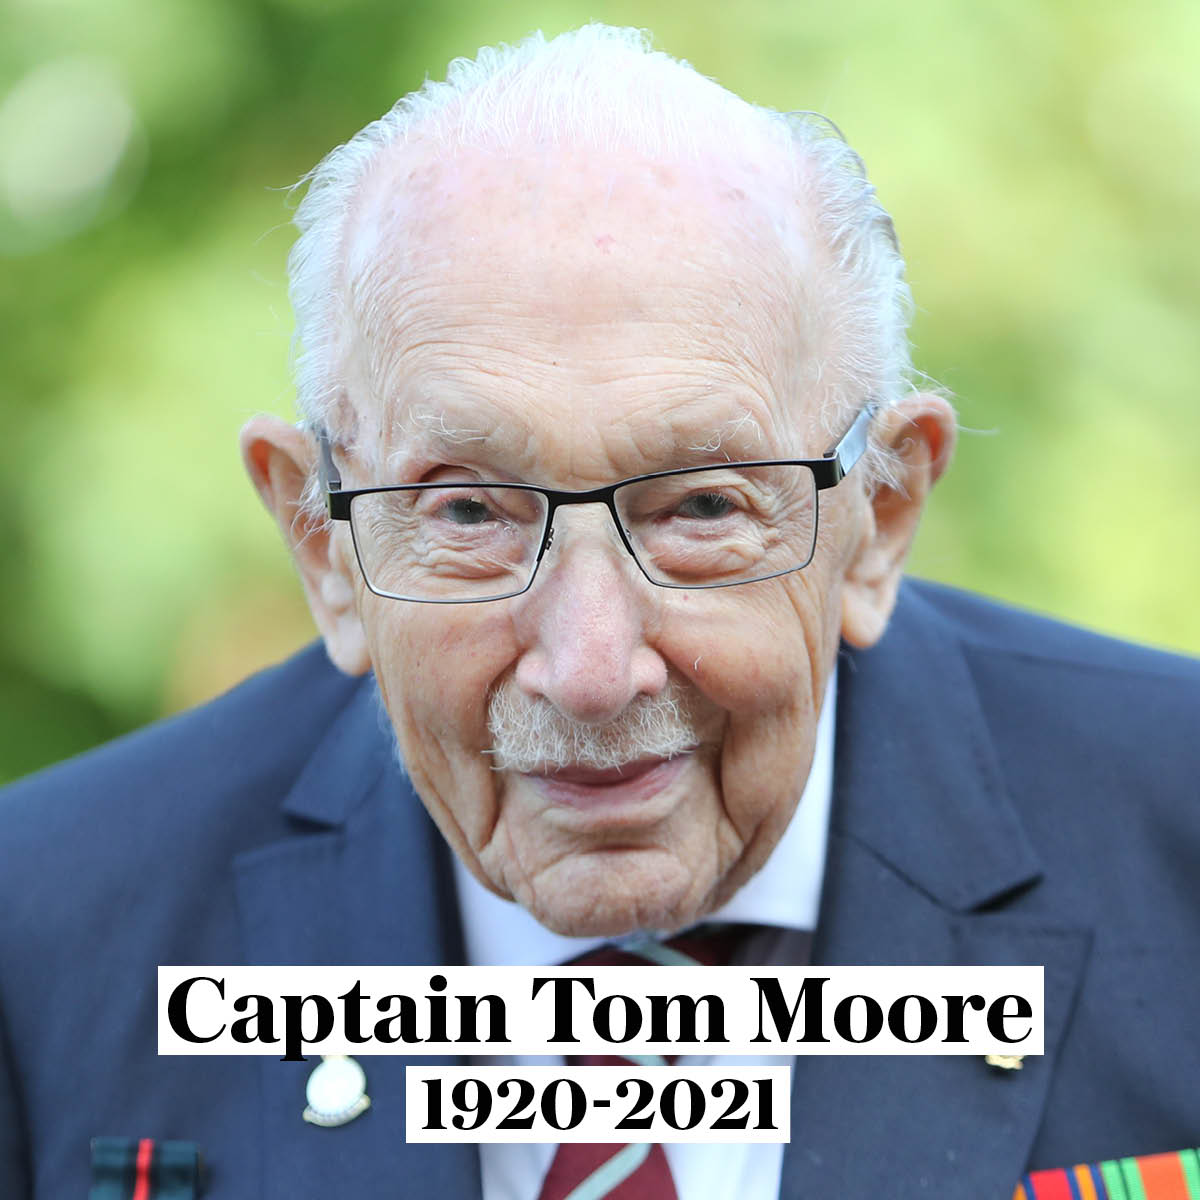  Breaking: Captain Sir Tom Moore has passed away  https://www.telegraph.co.uk/news/2021/02/02/sir-captain-tom-moore-dead-100-covid-latest-updates/